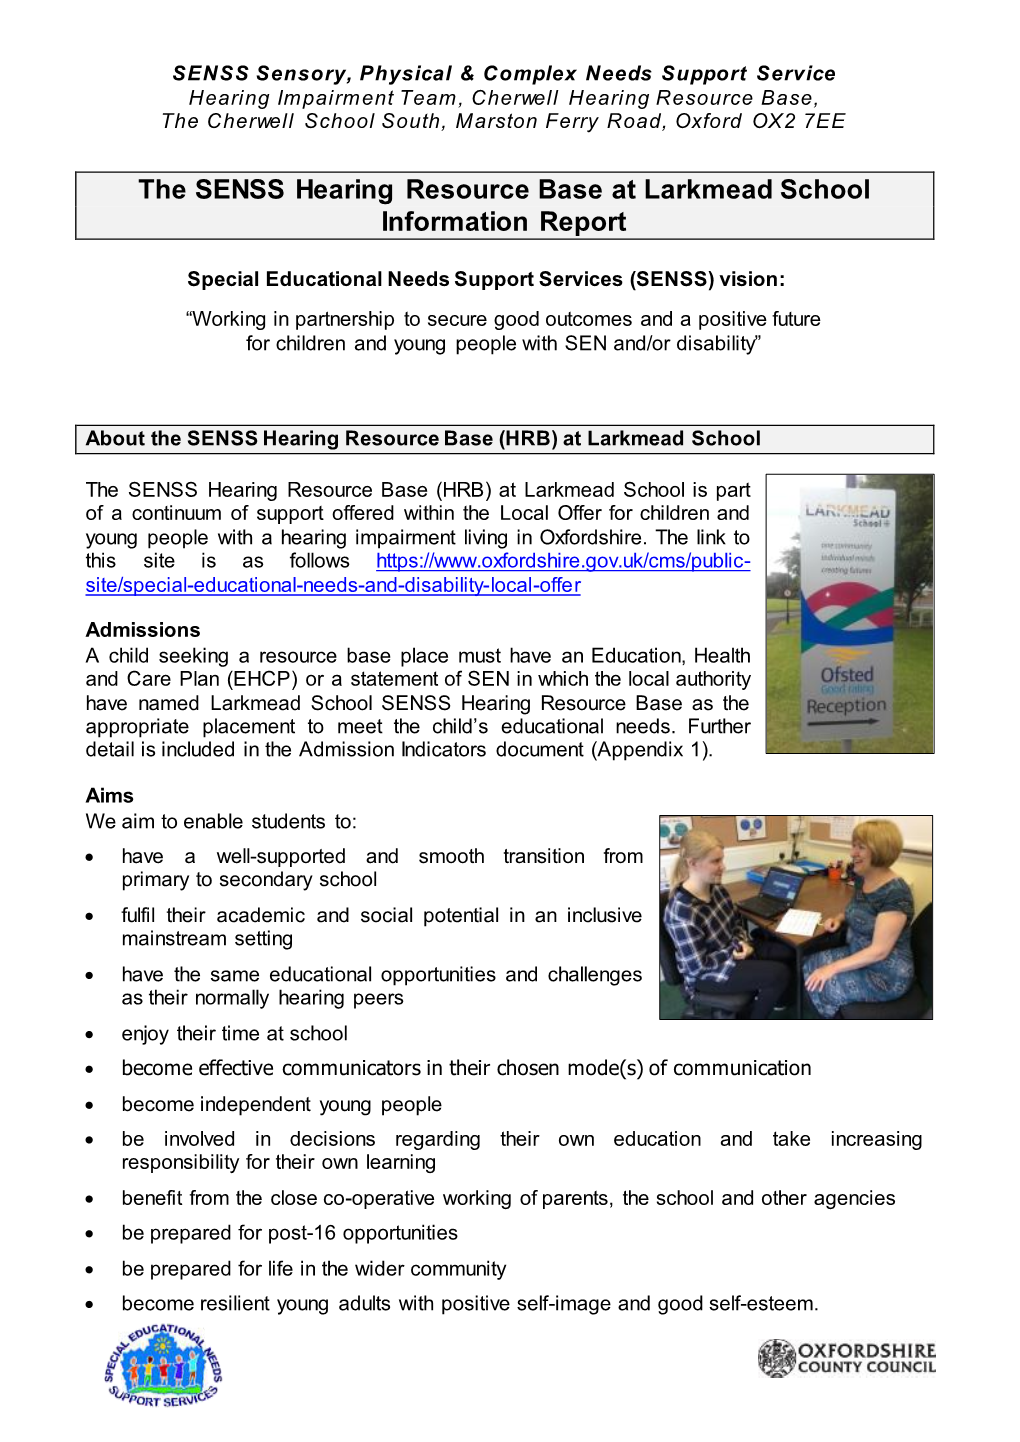 The SENSS Hearing Resource Base at Larkmead School Information Report